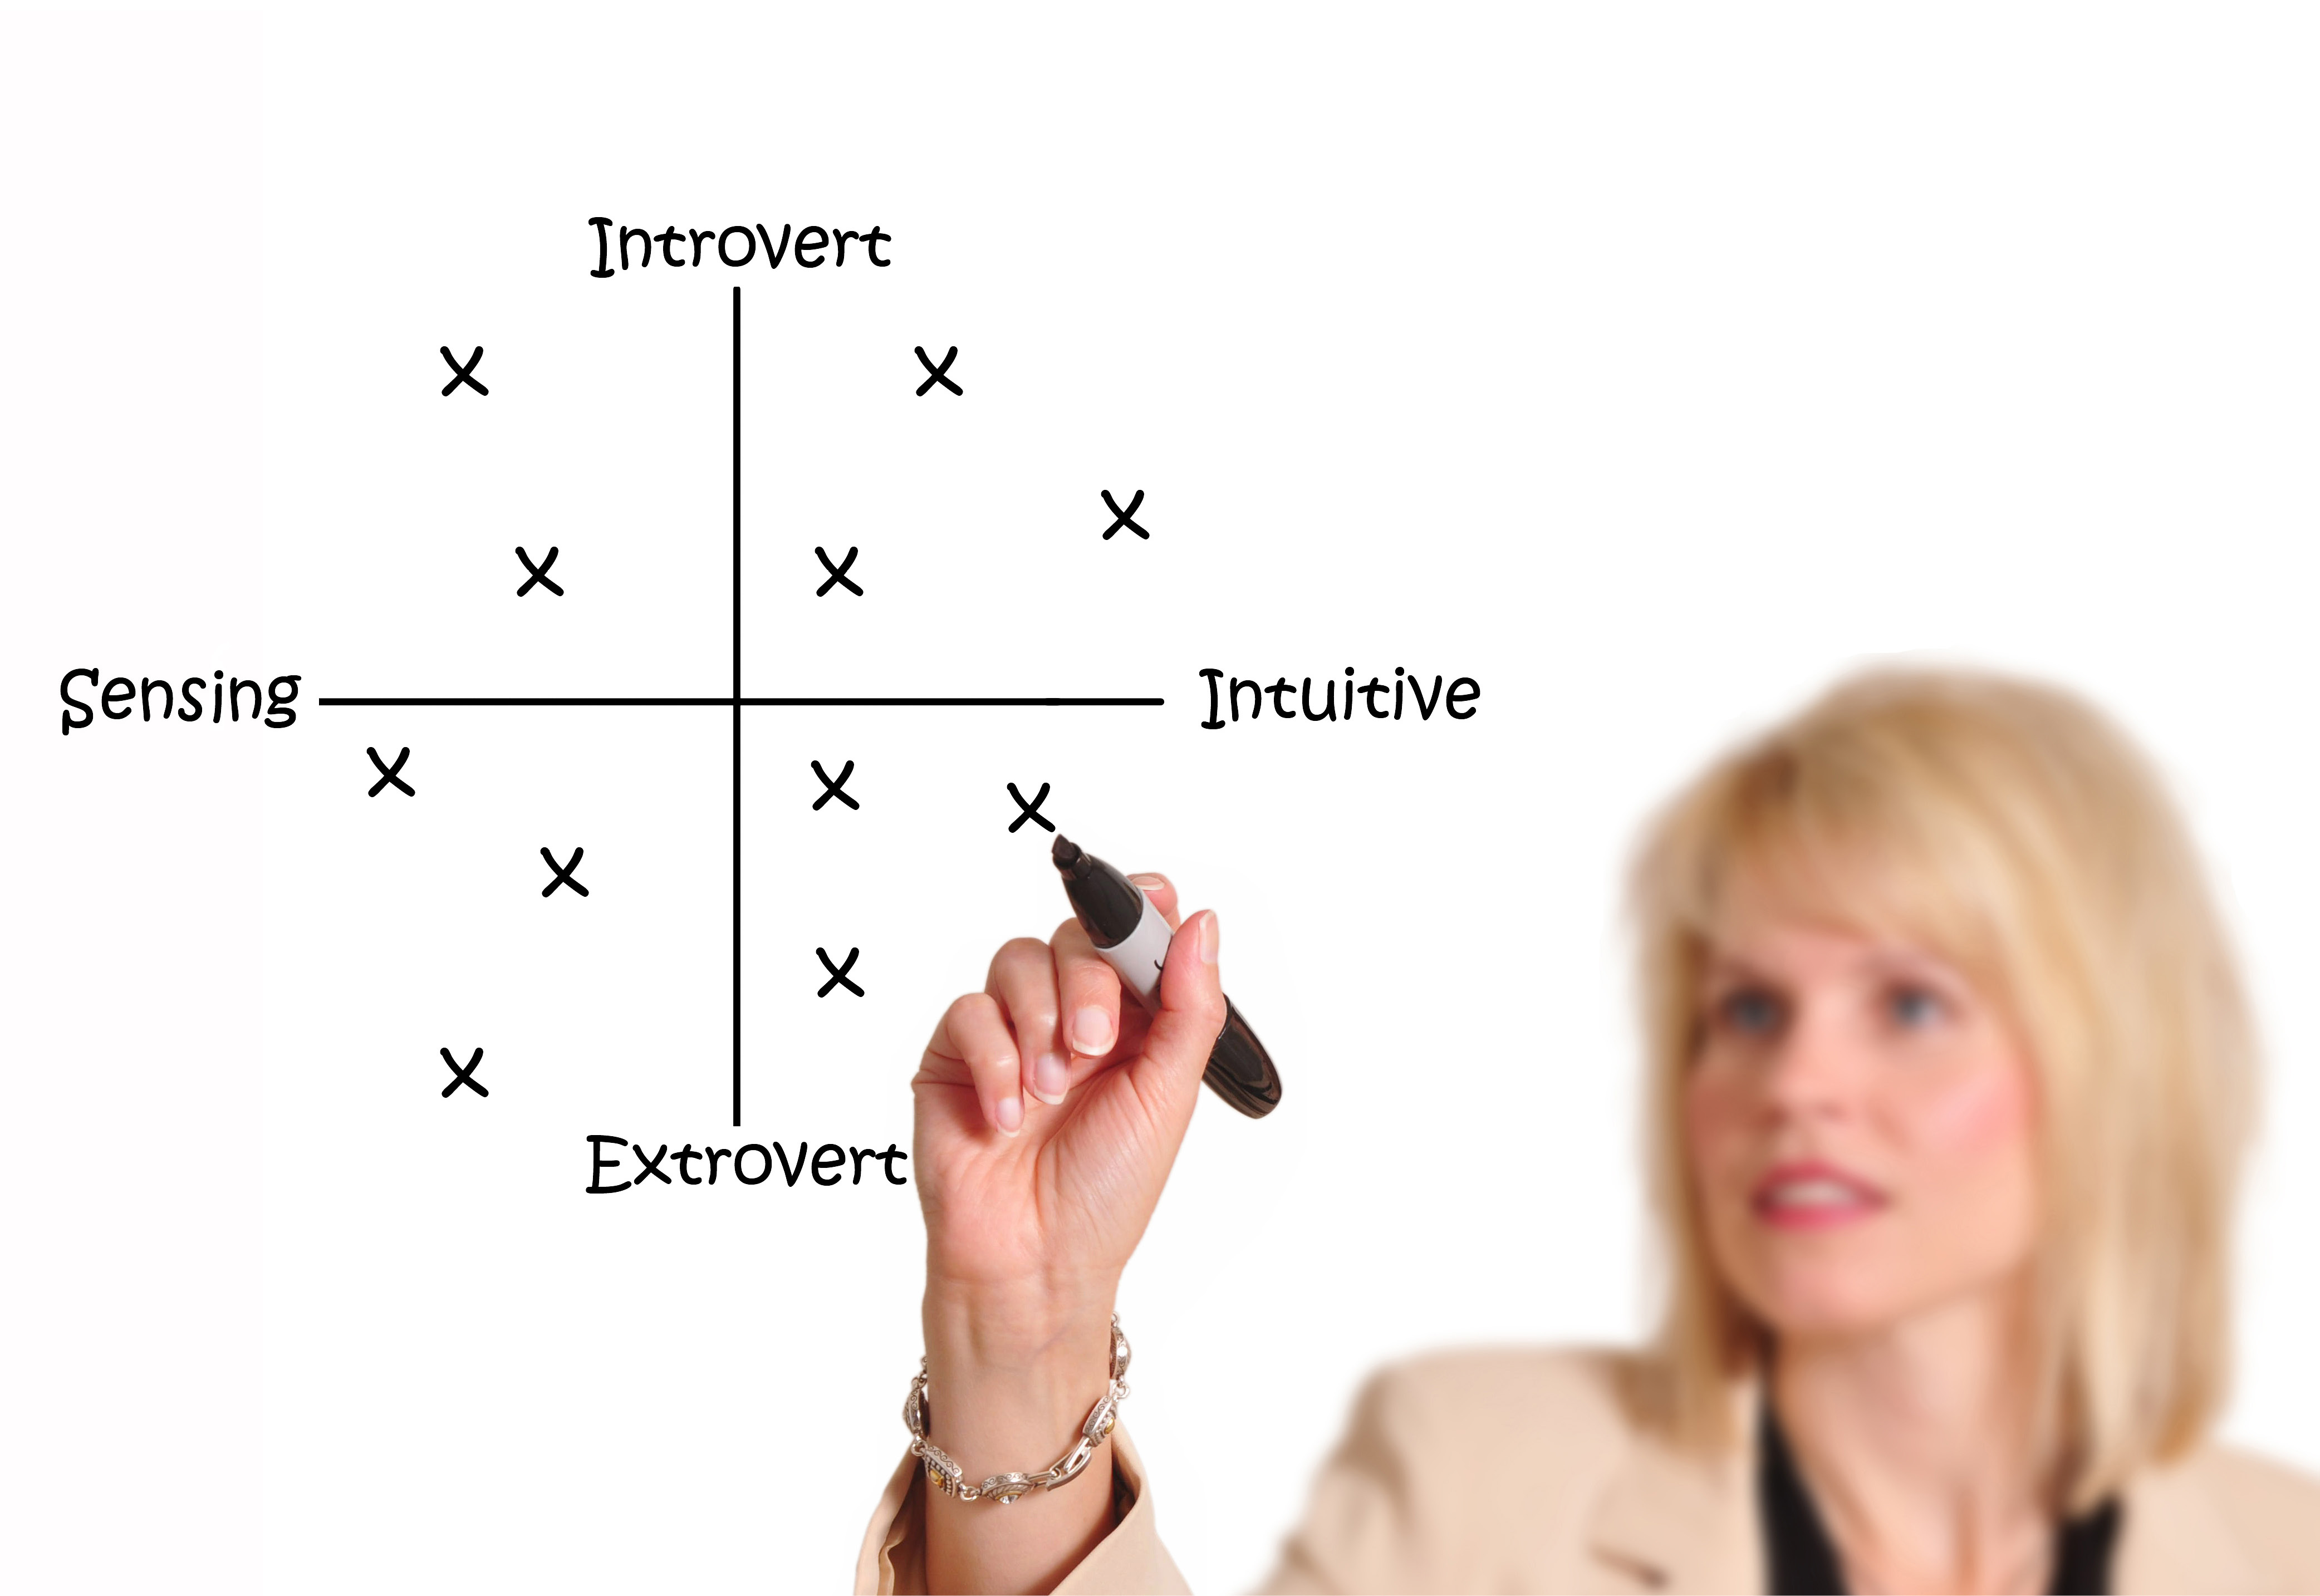 A woman drawing a diagram labeled with the words introvert, sensing, intuitive, and extrovert